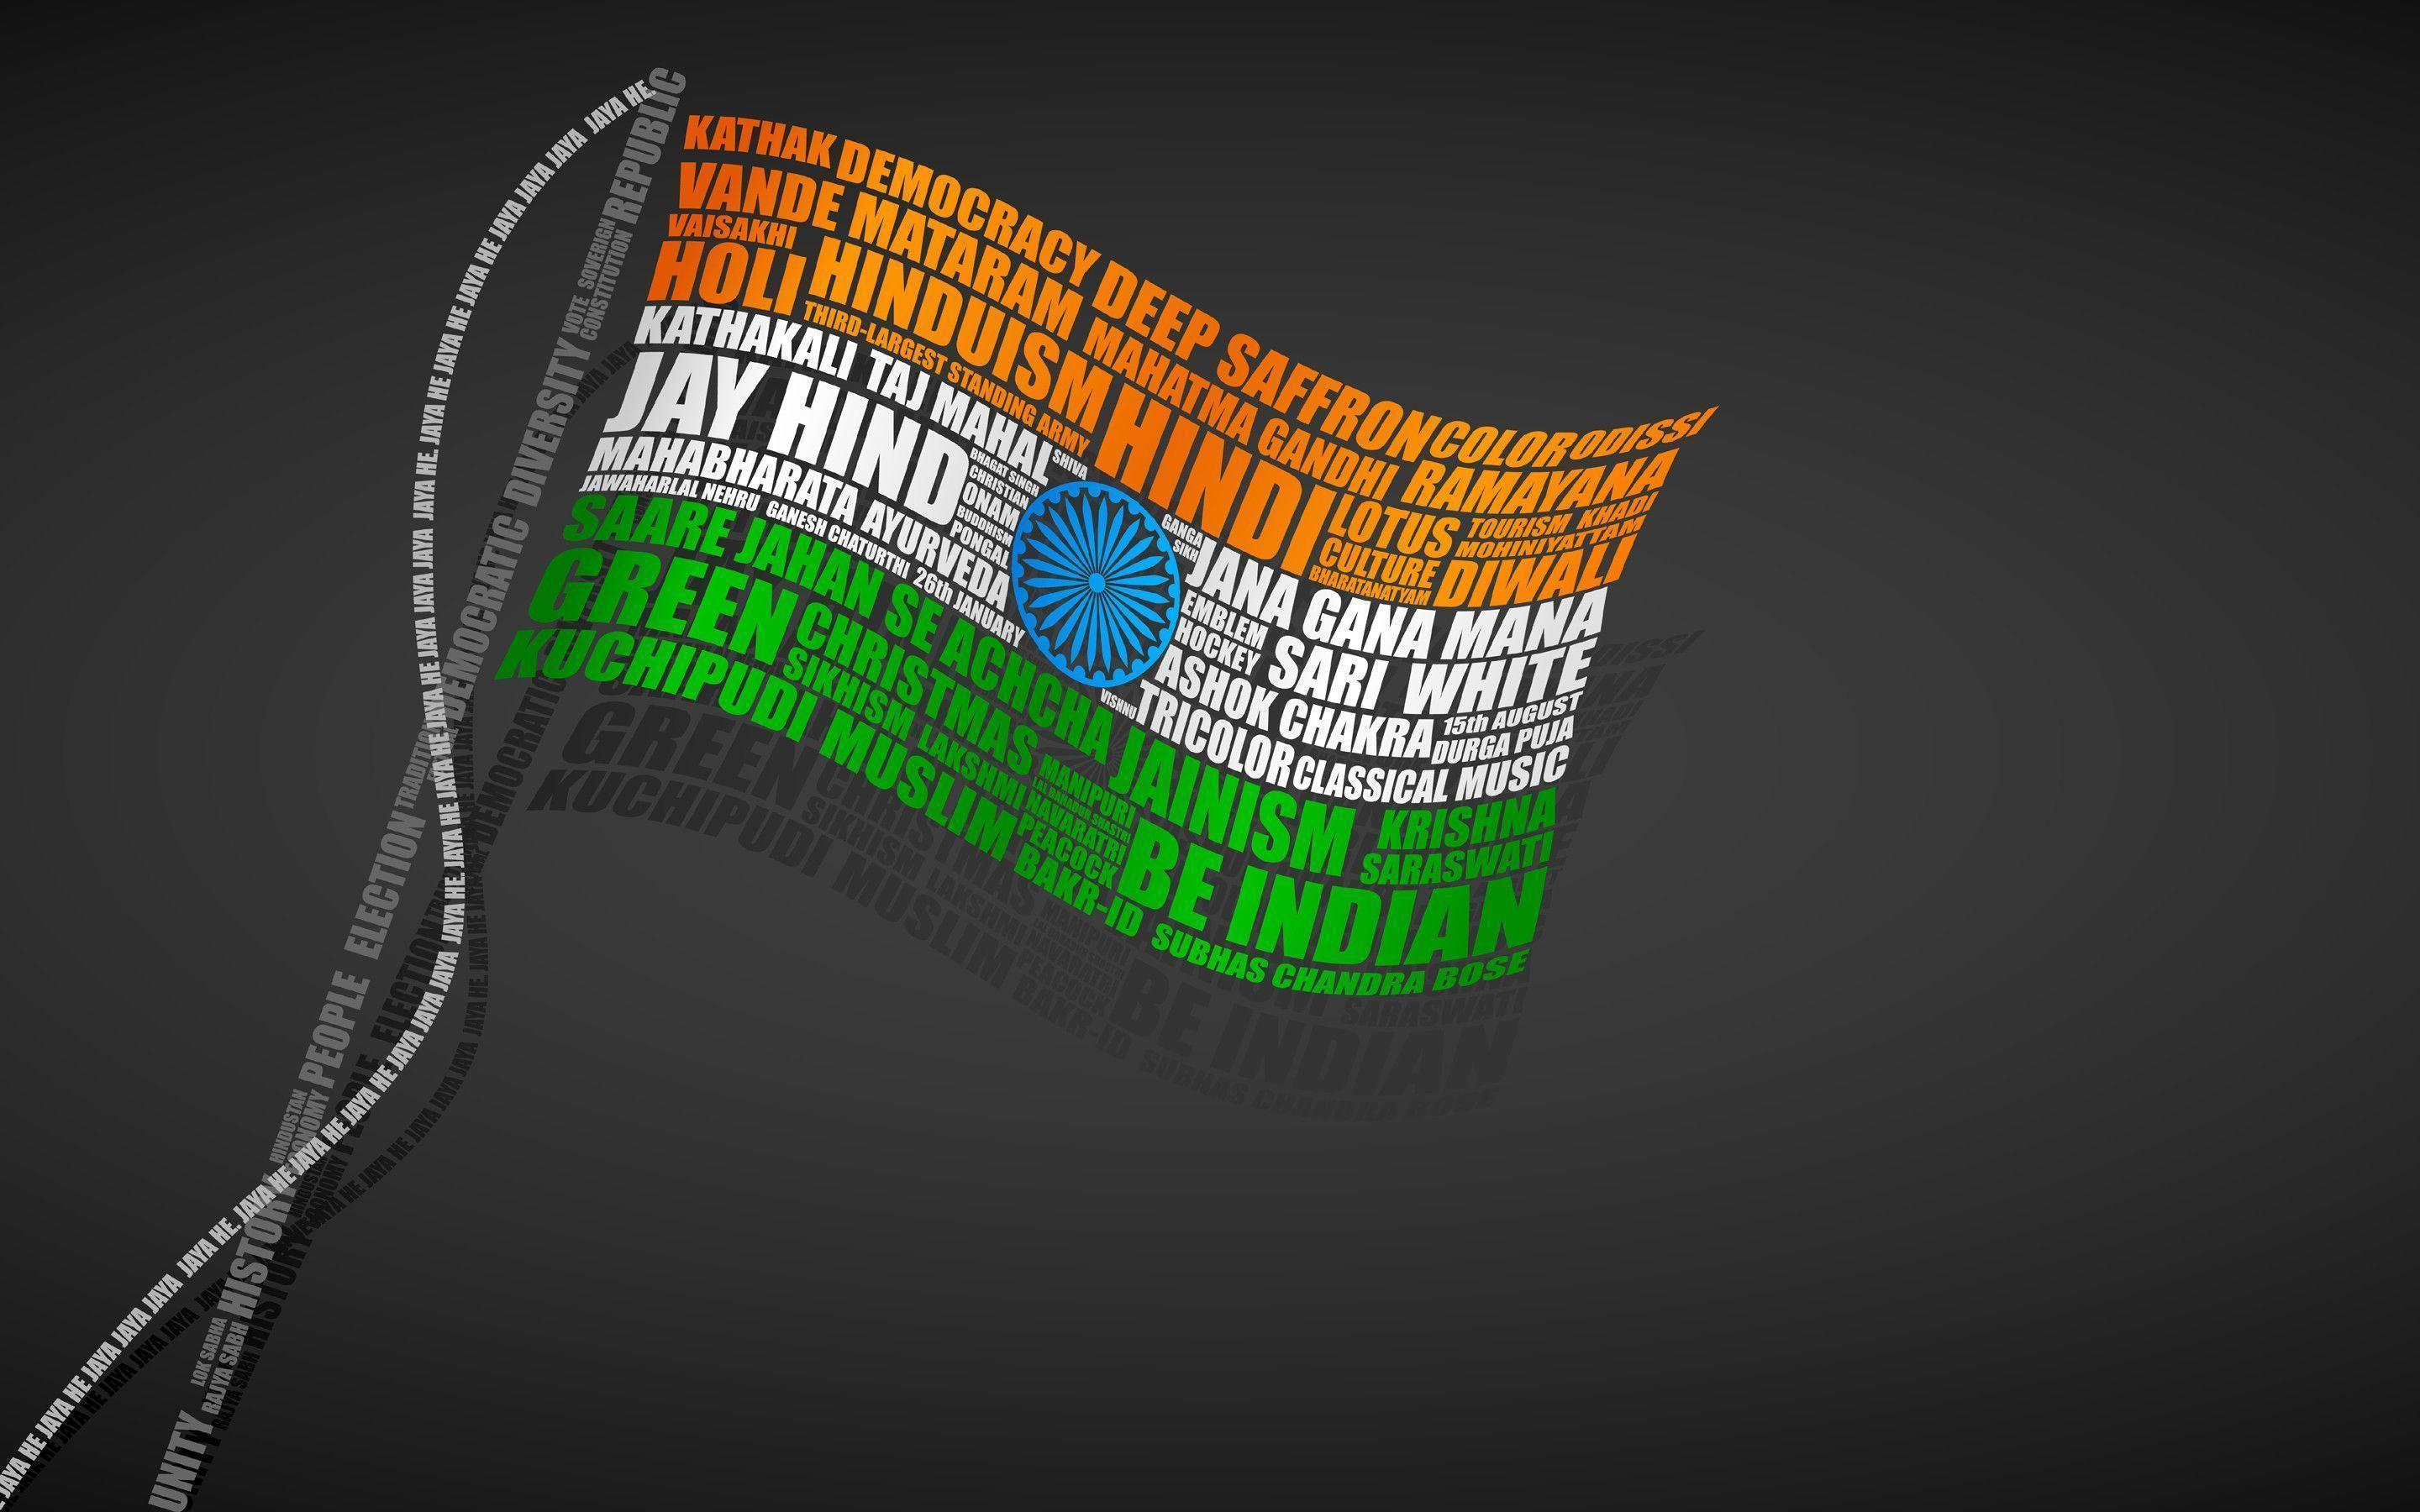 Indian Flag HD Image for Whatsapp DP Independence Day